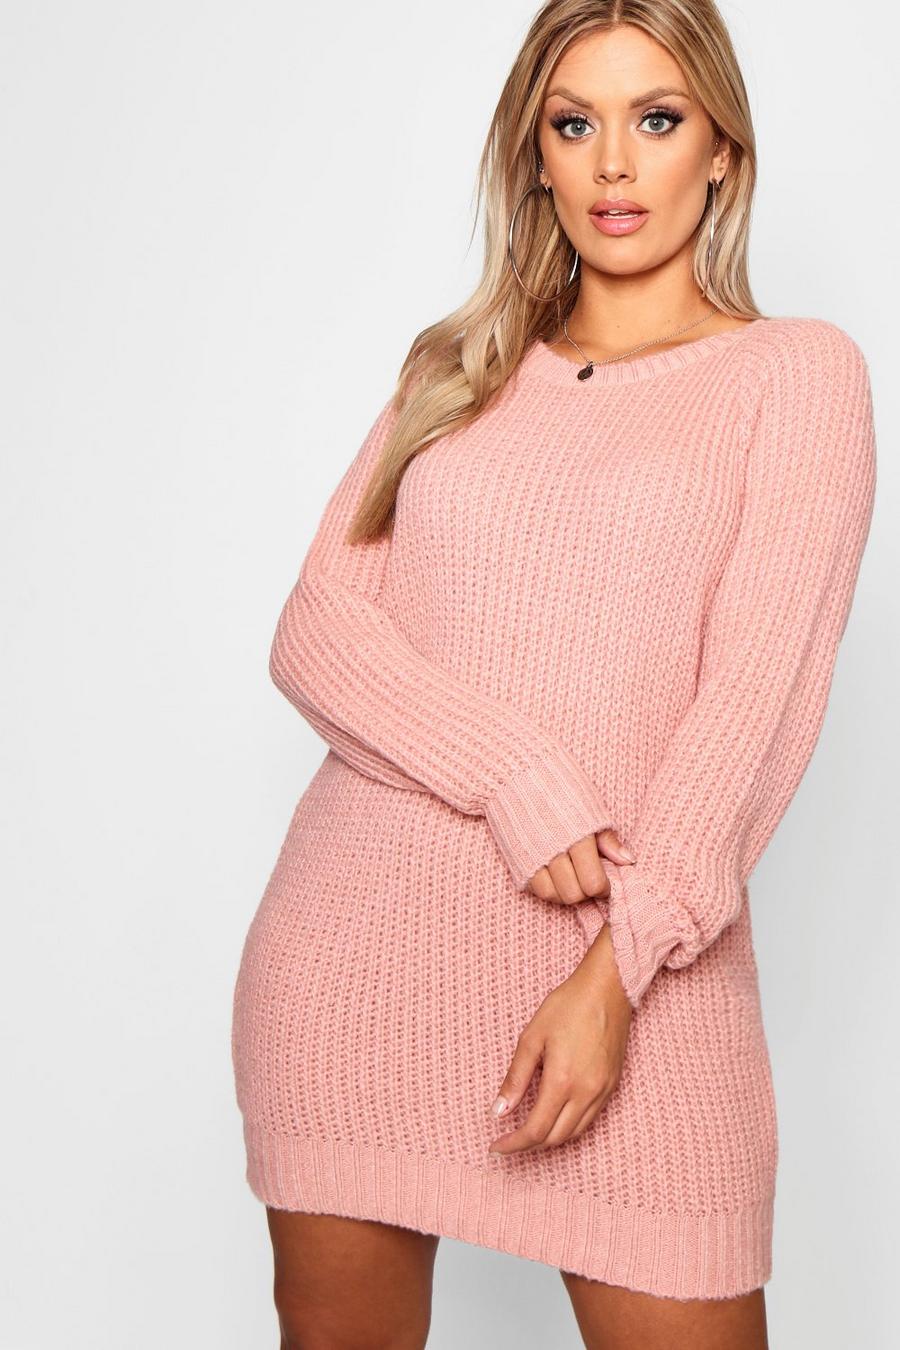 Robe pull en maille douce Plus, Blush image number 1